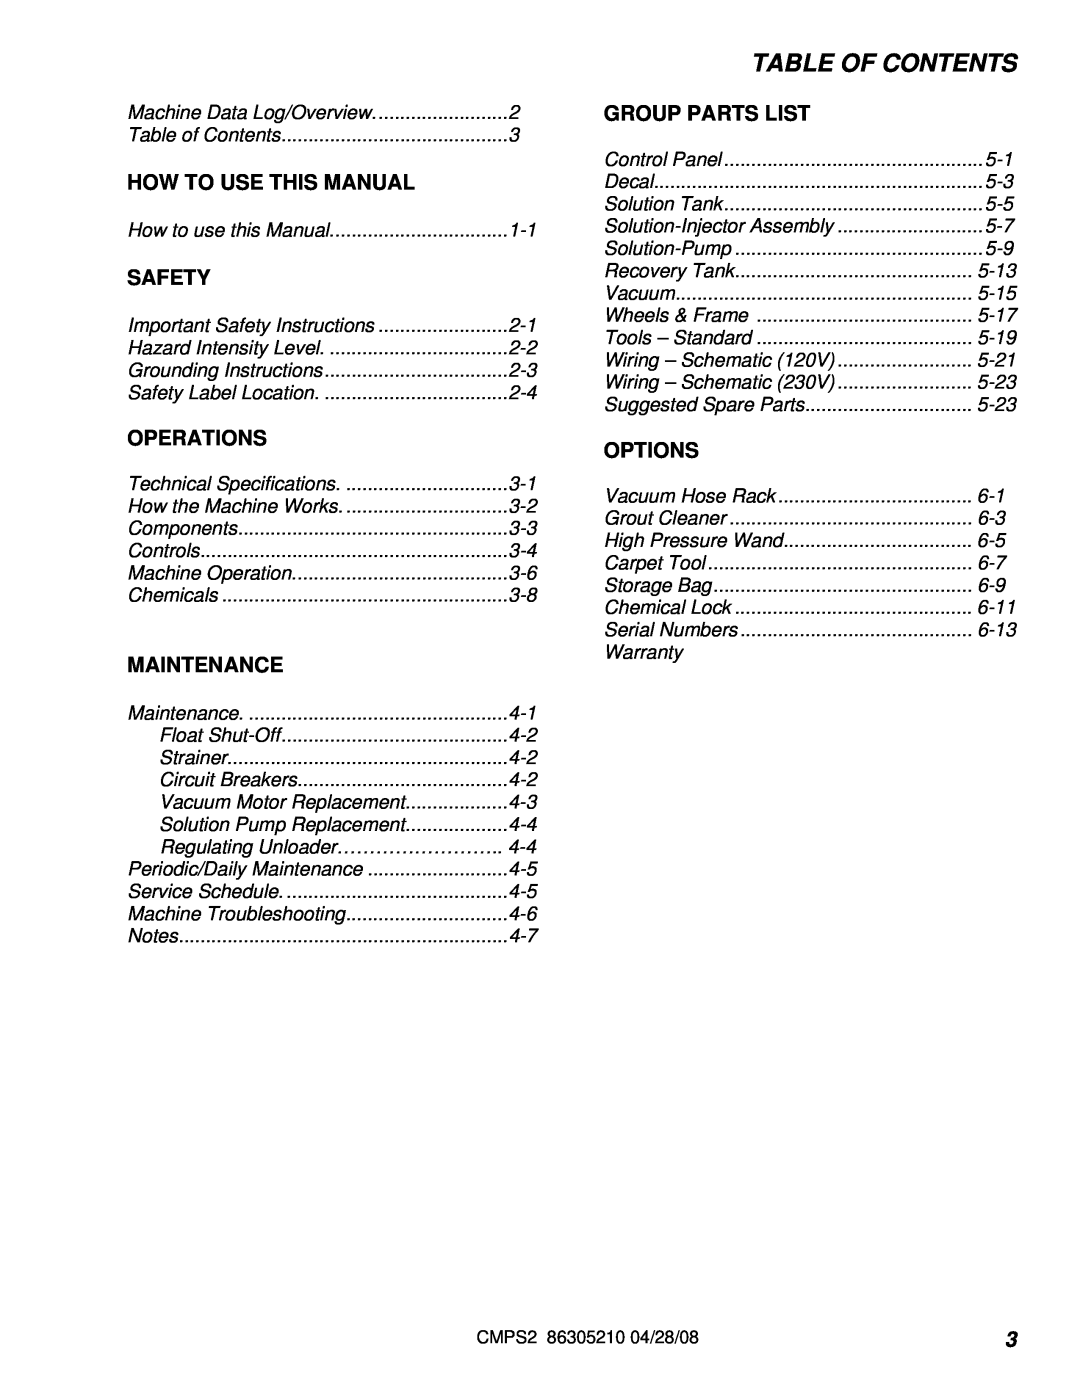 Windsor 10070570 Table Of Contents, How To Use This Manual, Safety, Operations, Maintenance, Group Parts List, Options 